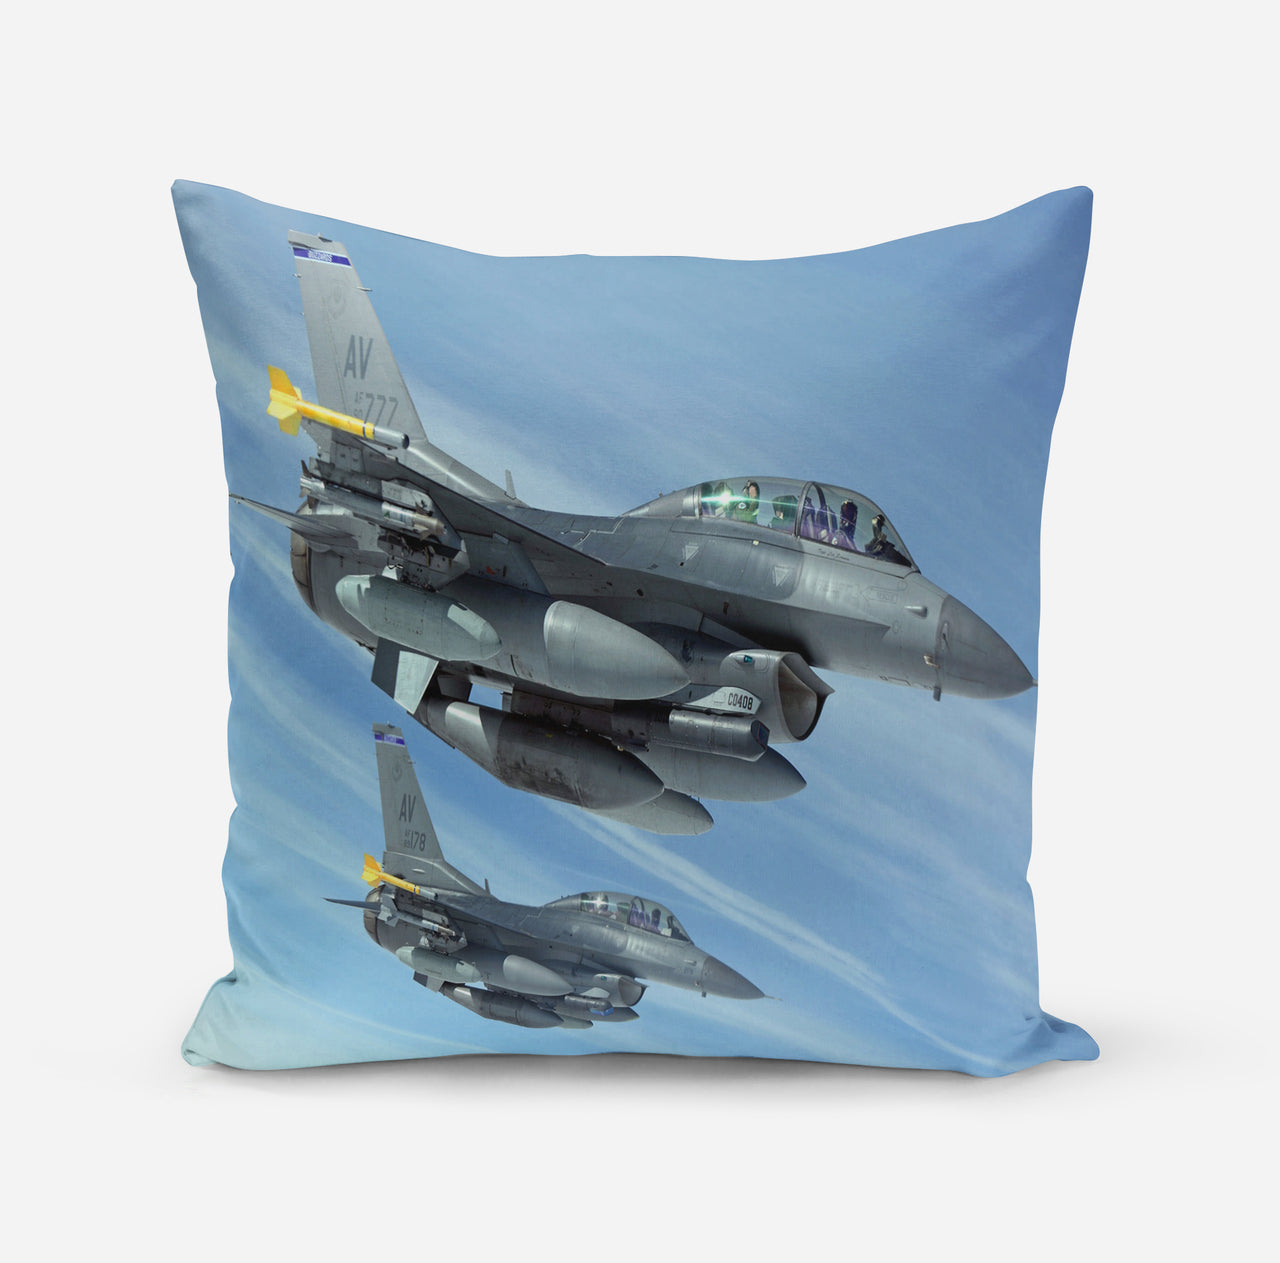 Two Fighting Falcon Designed Pillowsc